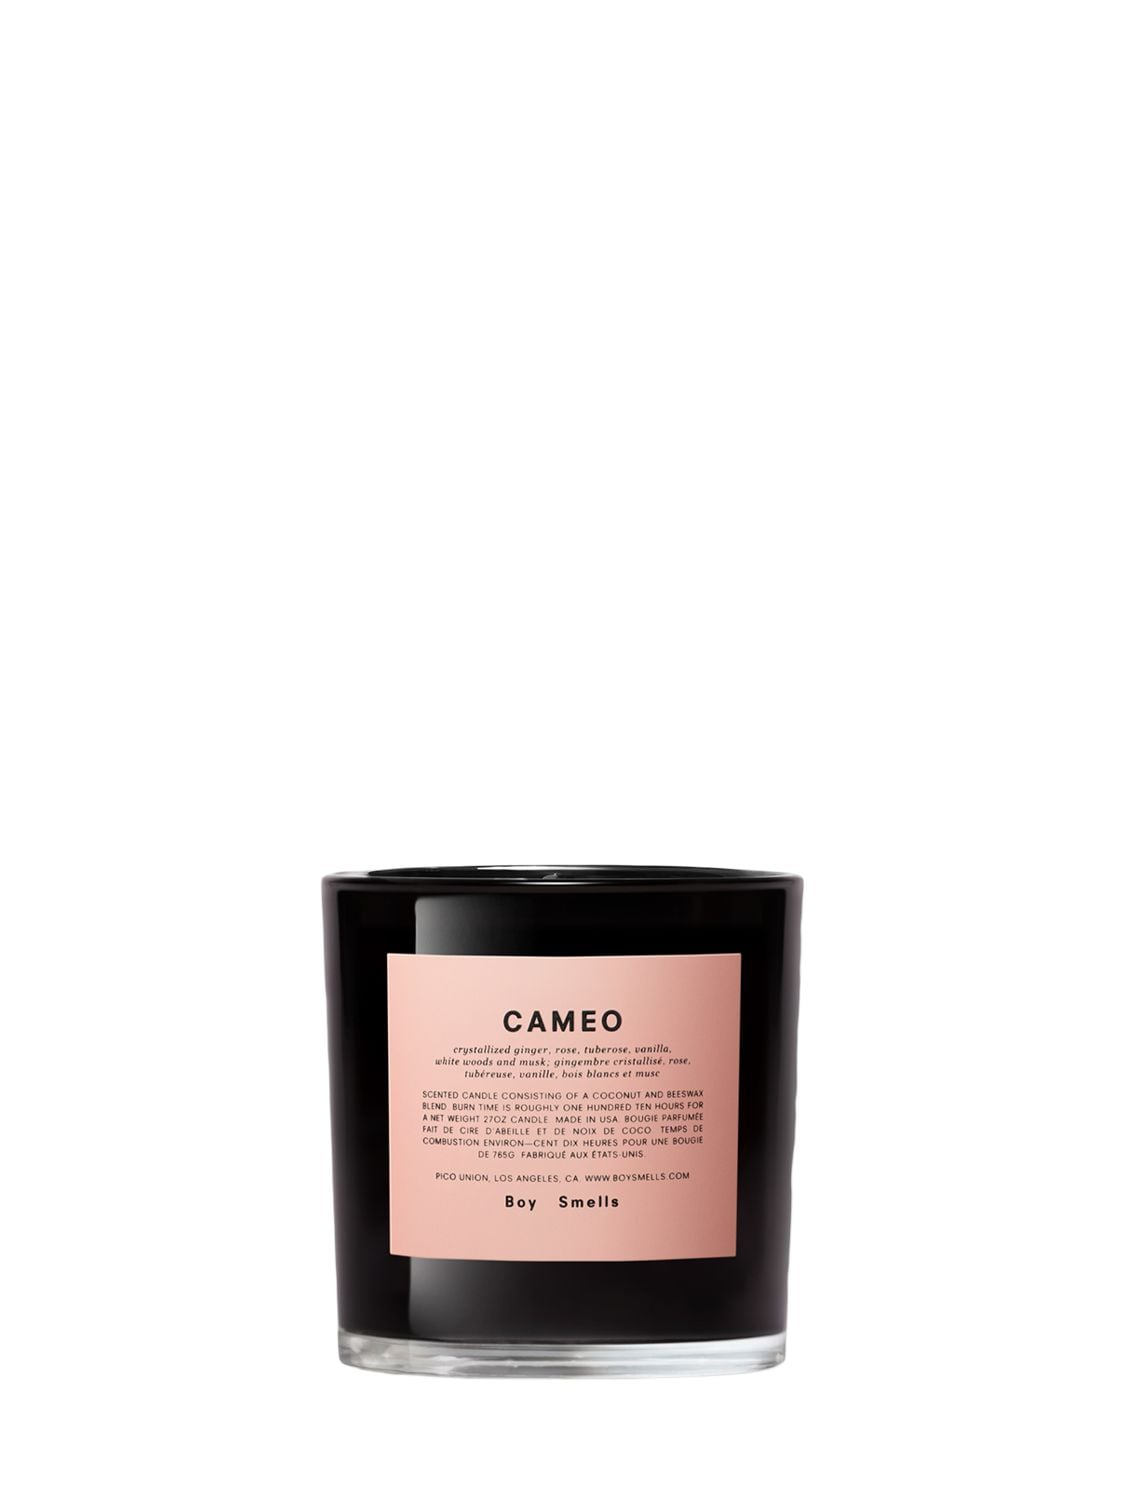 Boy Smells 765g Cameo Magnum Candle In Black